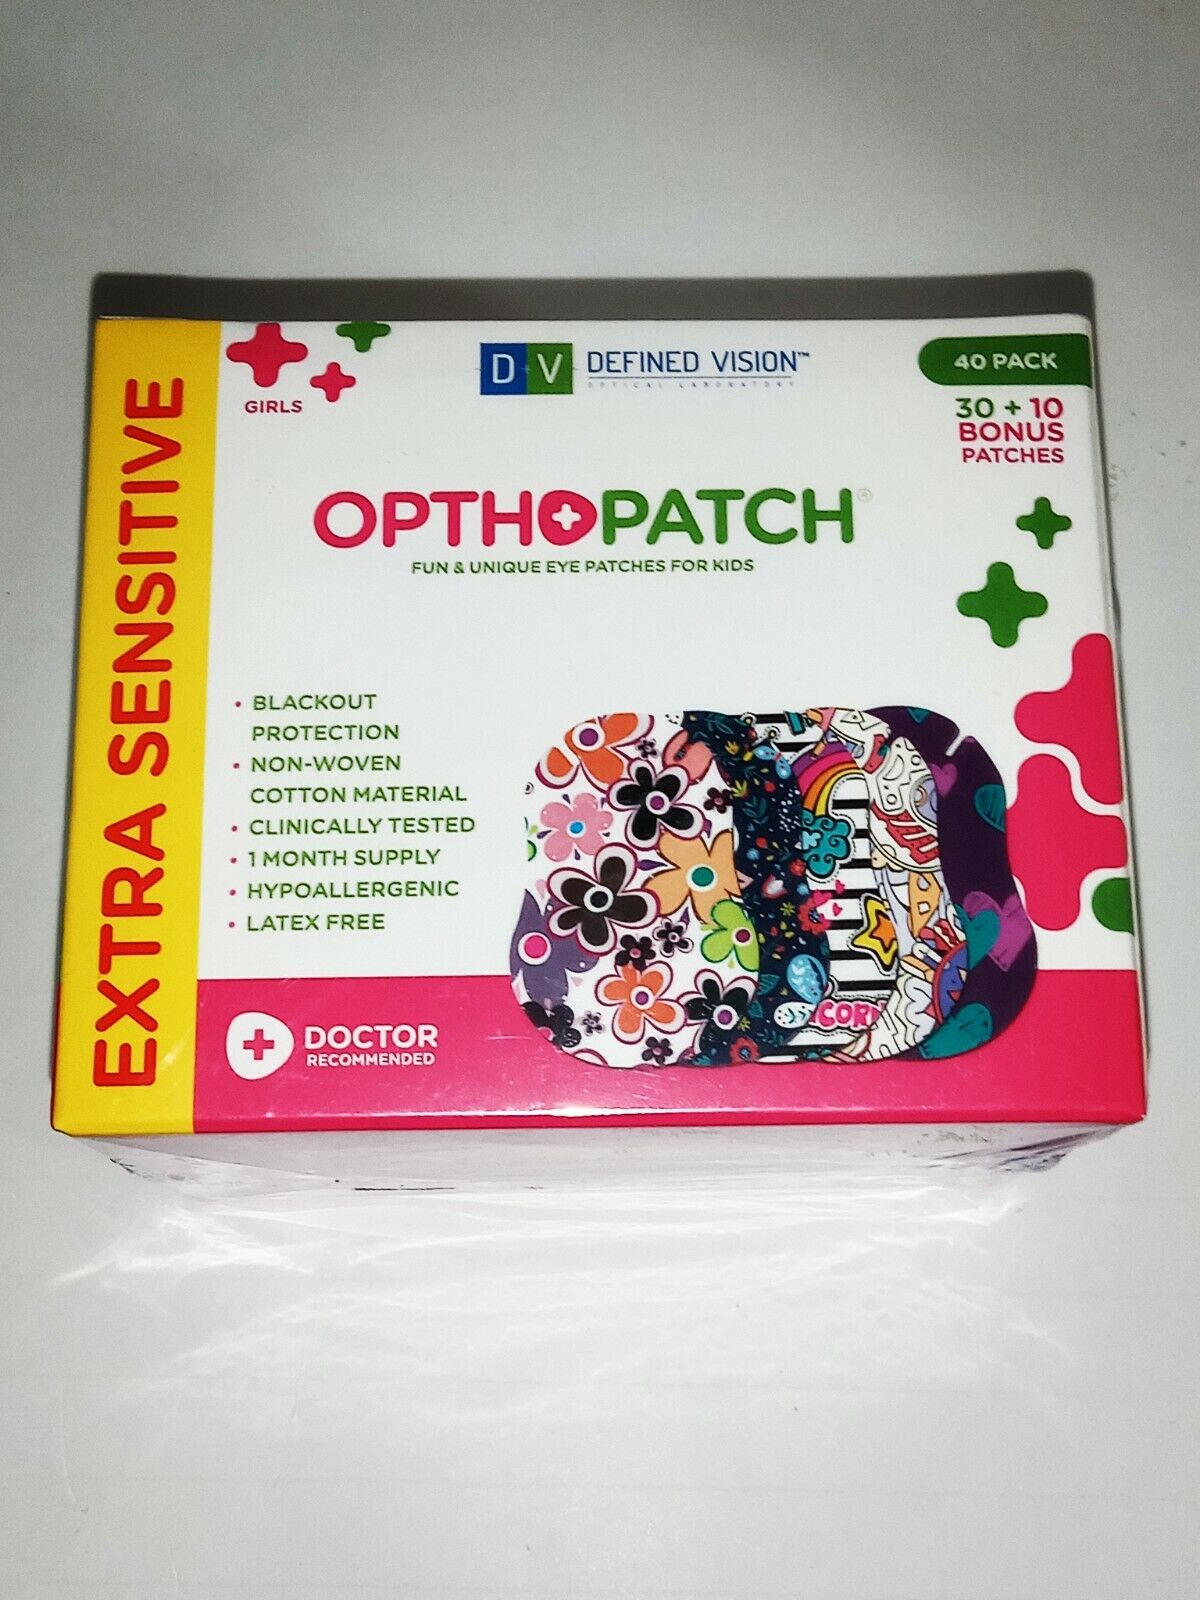 Defined Vision Opthopatch Girls Fun & Unique Eye Patches - 1 Month Supply (40)